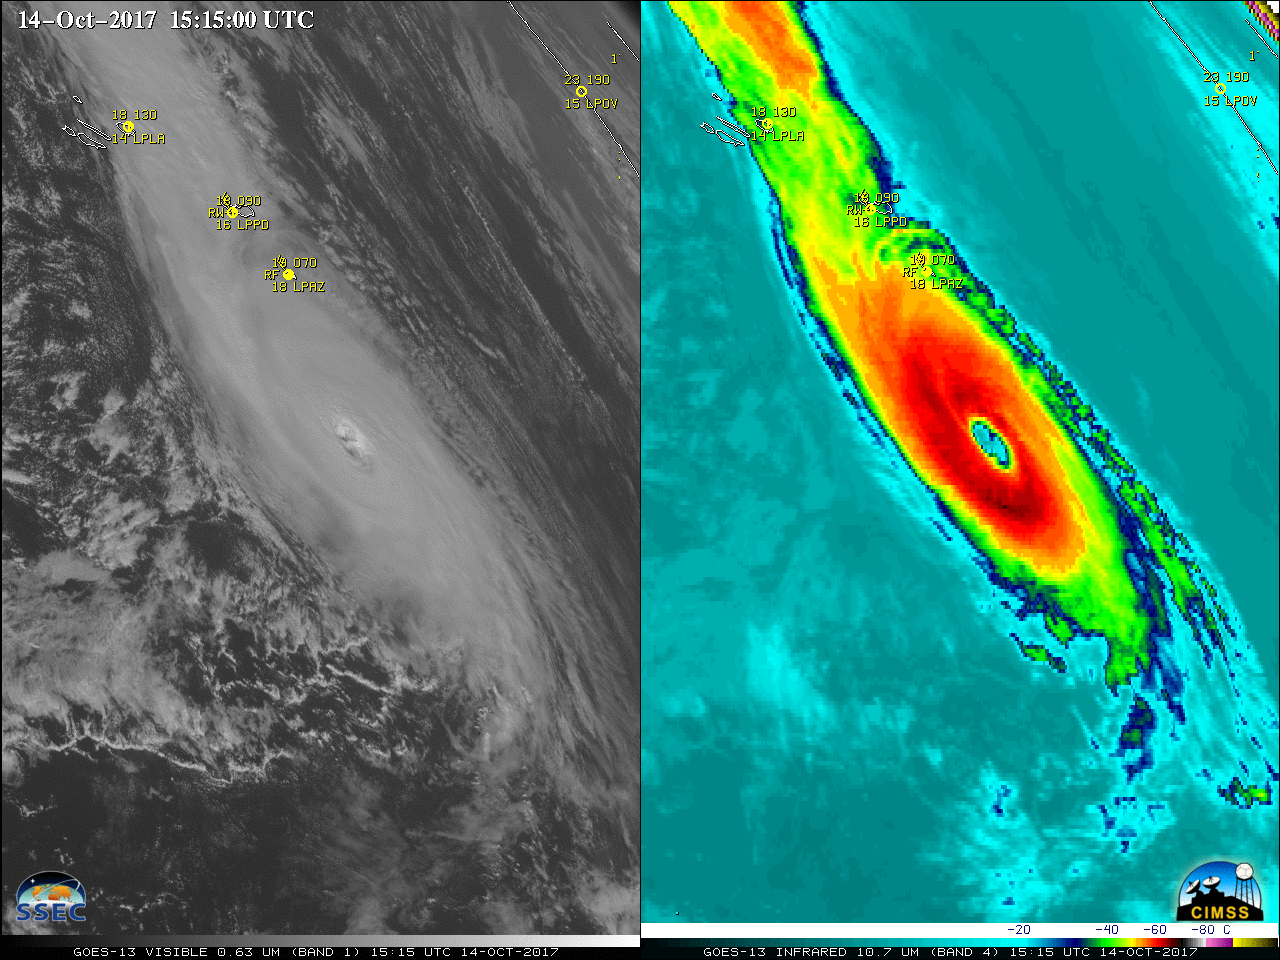 GOES-13 Visible (0.63 µm, left) and Infrared Window (10.7 µm, right) images, with hourly surface reports (in metric units) plotted in yellow [click to animate]